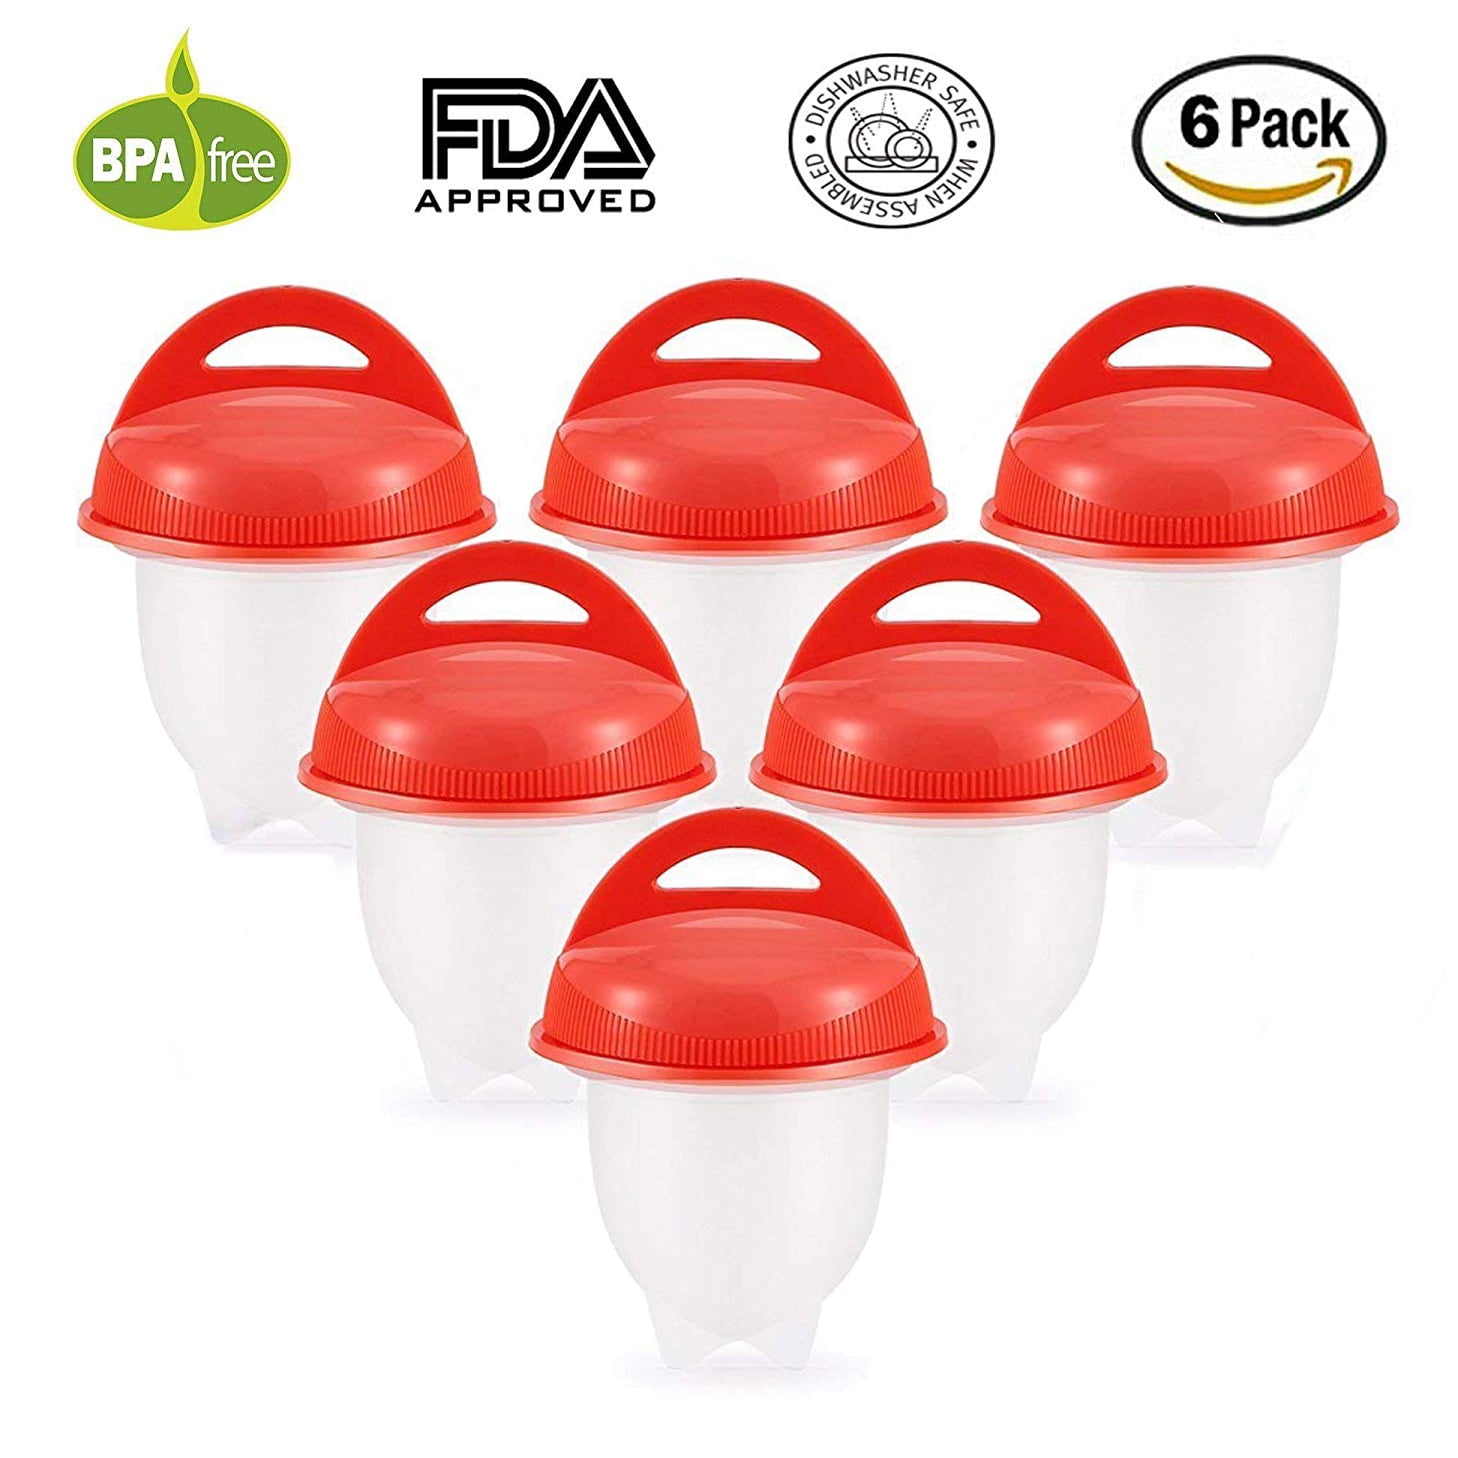 Home City Market No.1 Hard Boiled Silicone Egg Cooker Without The Shell As Seen on TV, Non Stick Egg Poacher with Holder